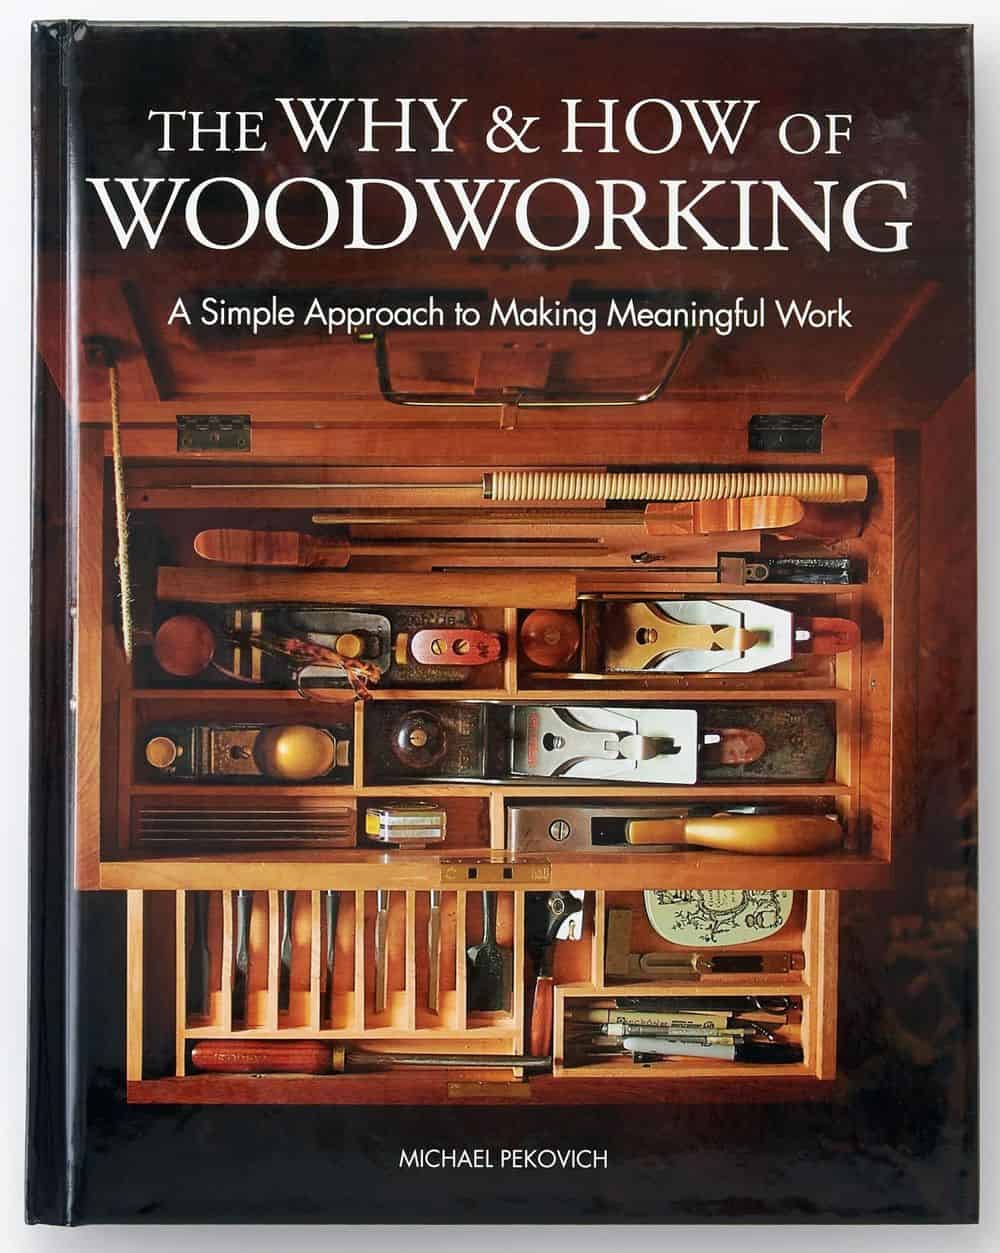 >The why and how of woodworking